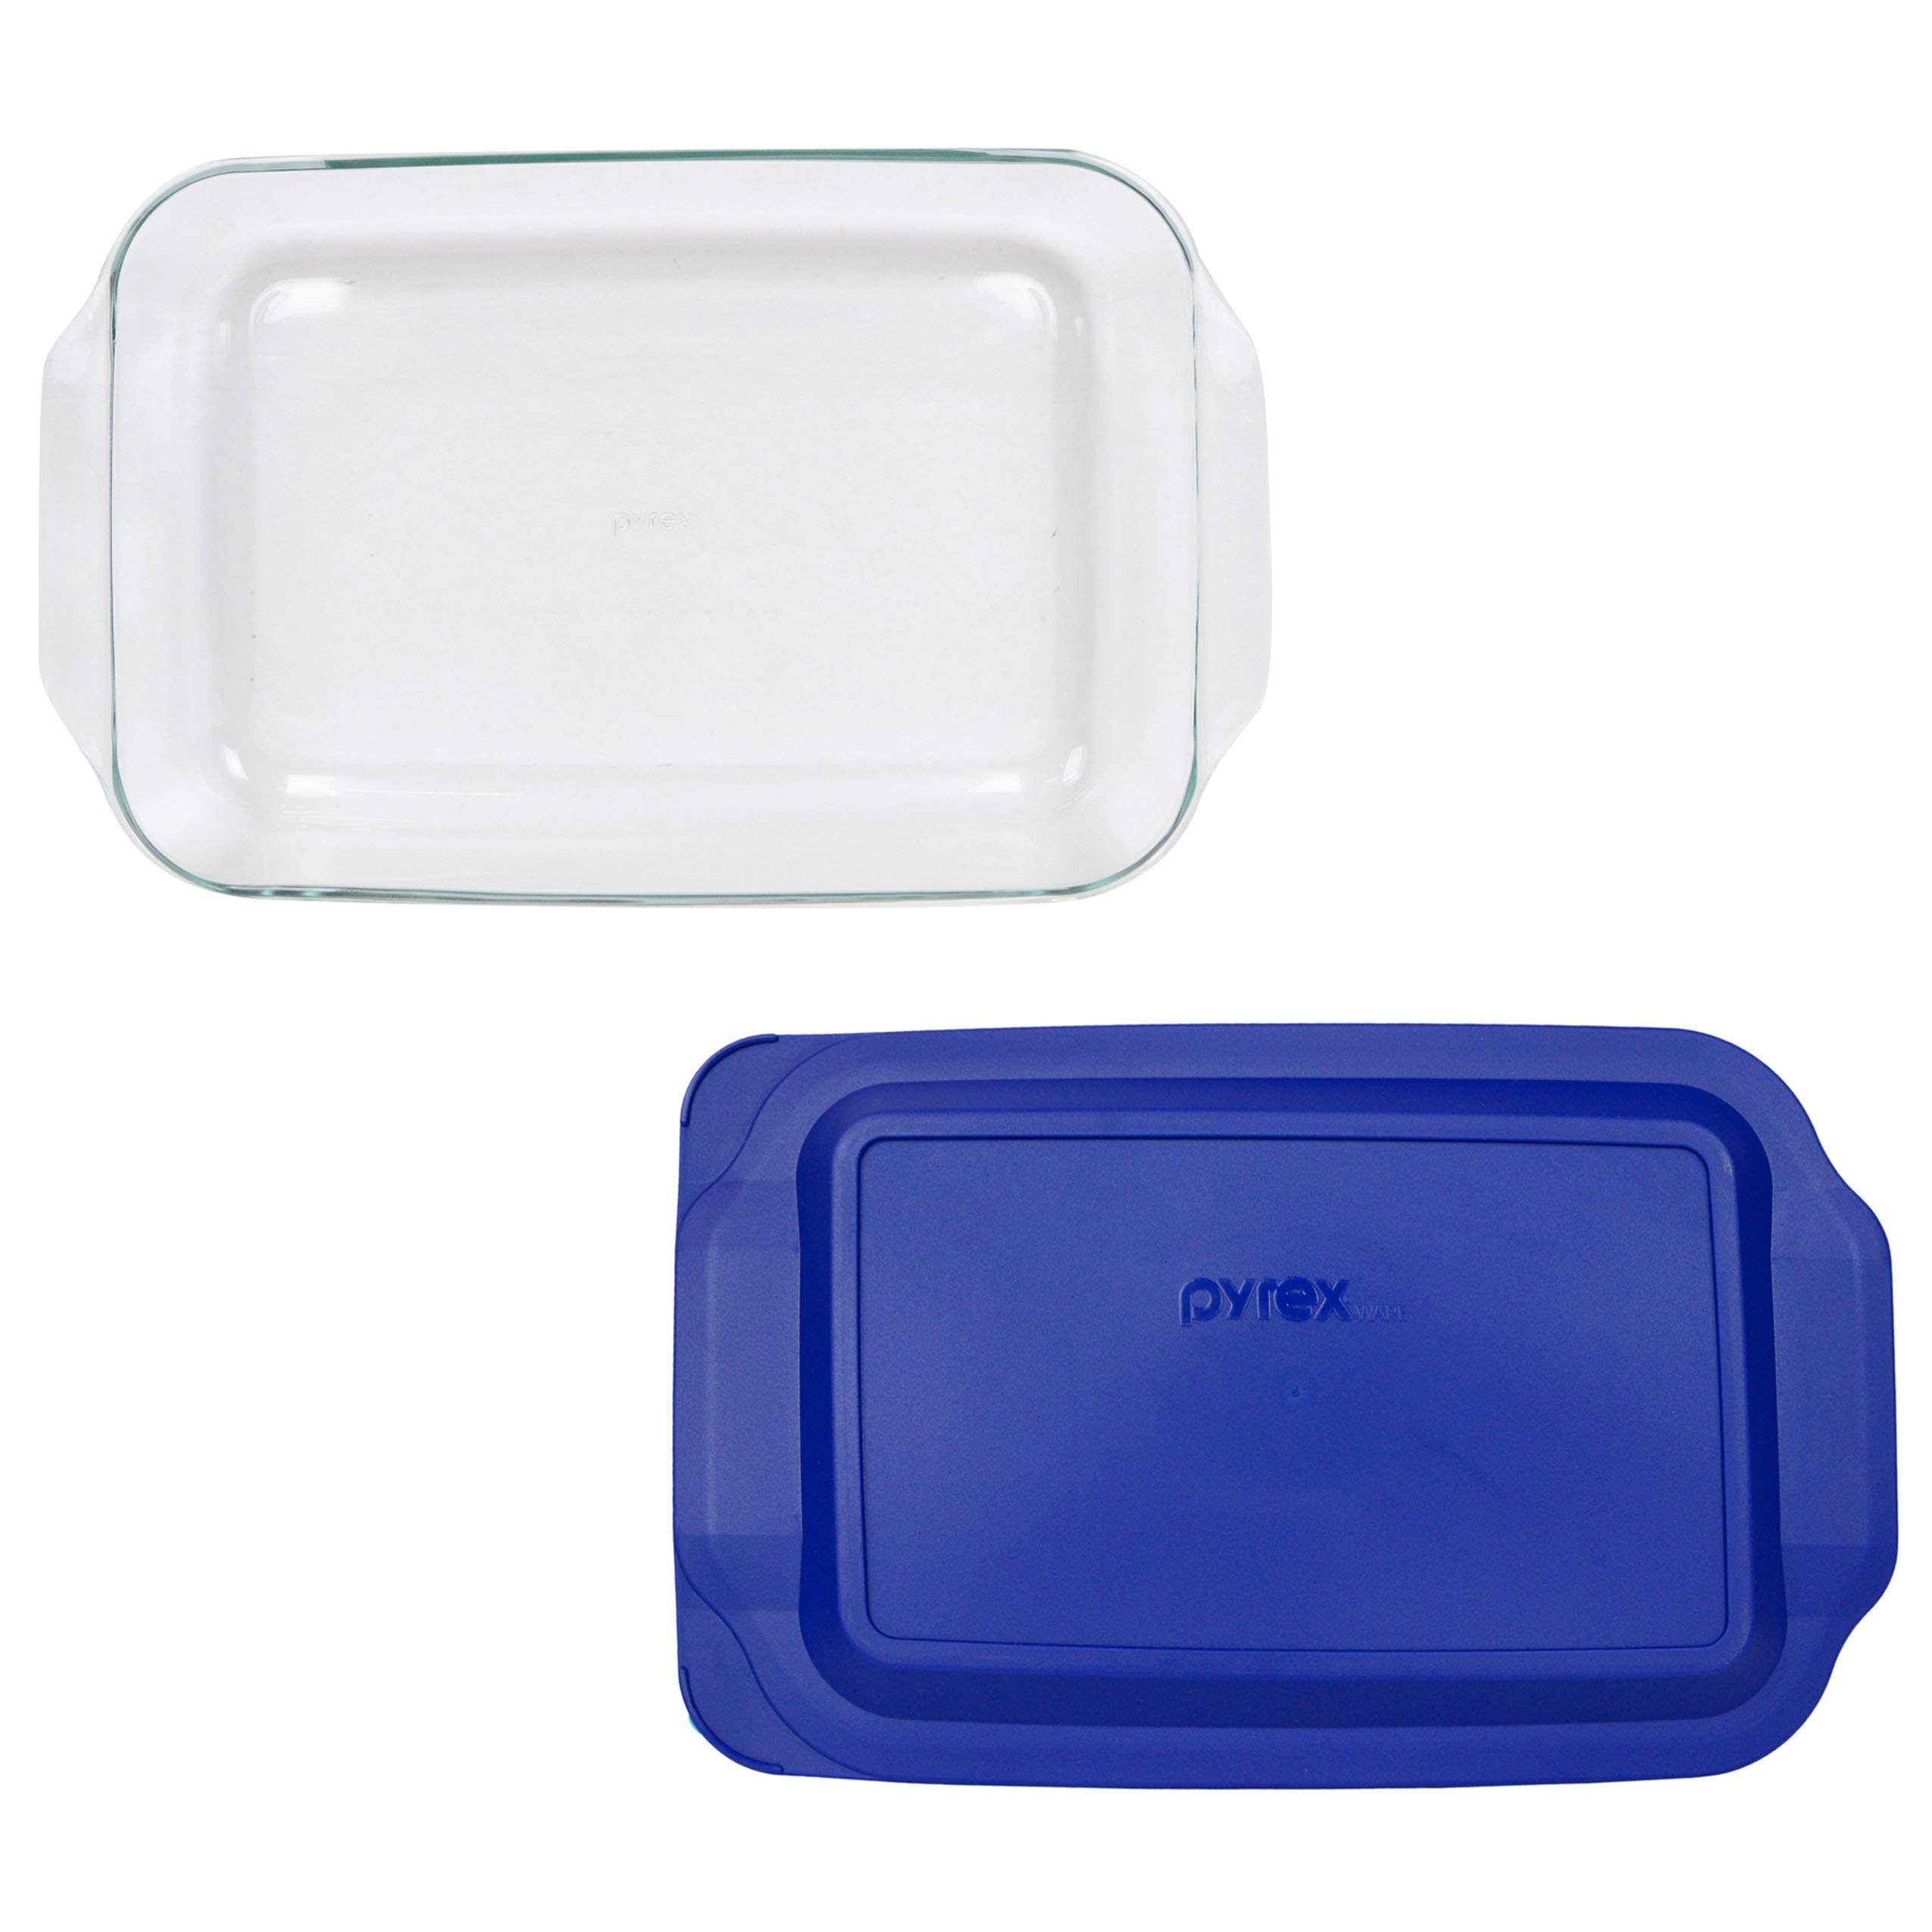 PYREX 3QT Glass Baking Dish with Blue Cover 9